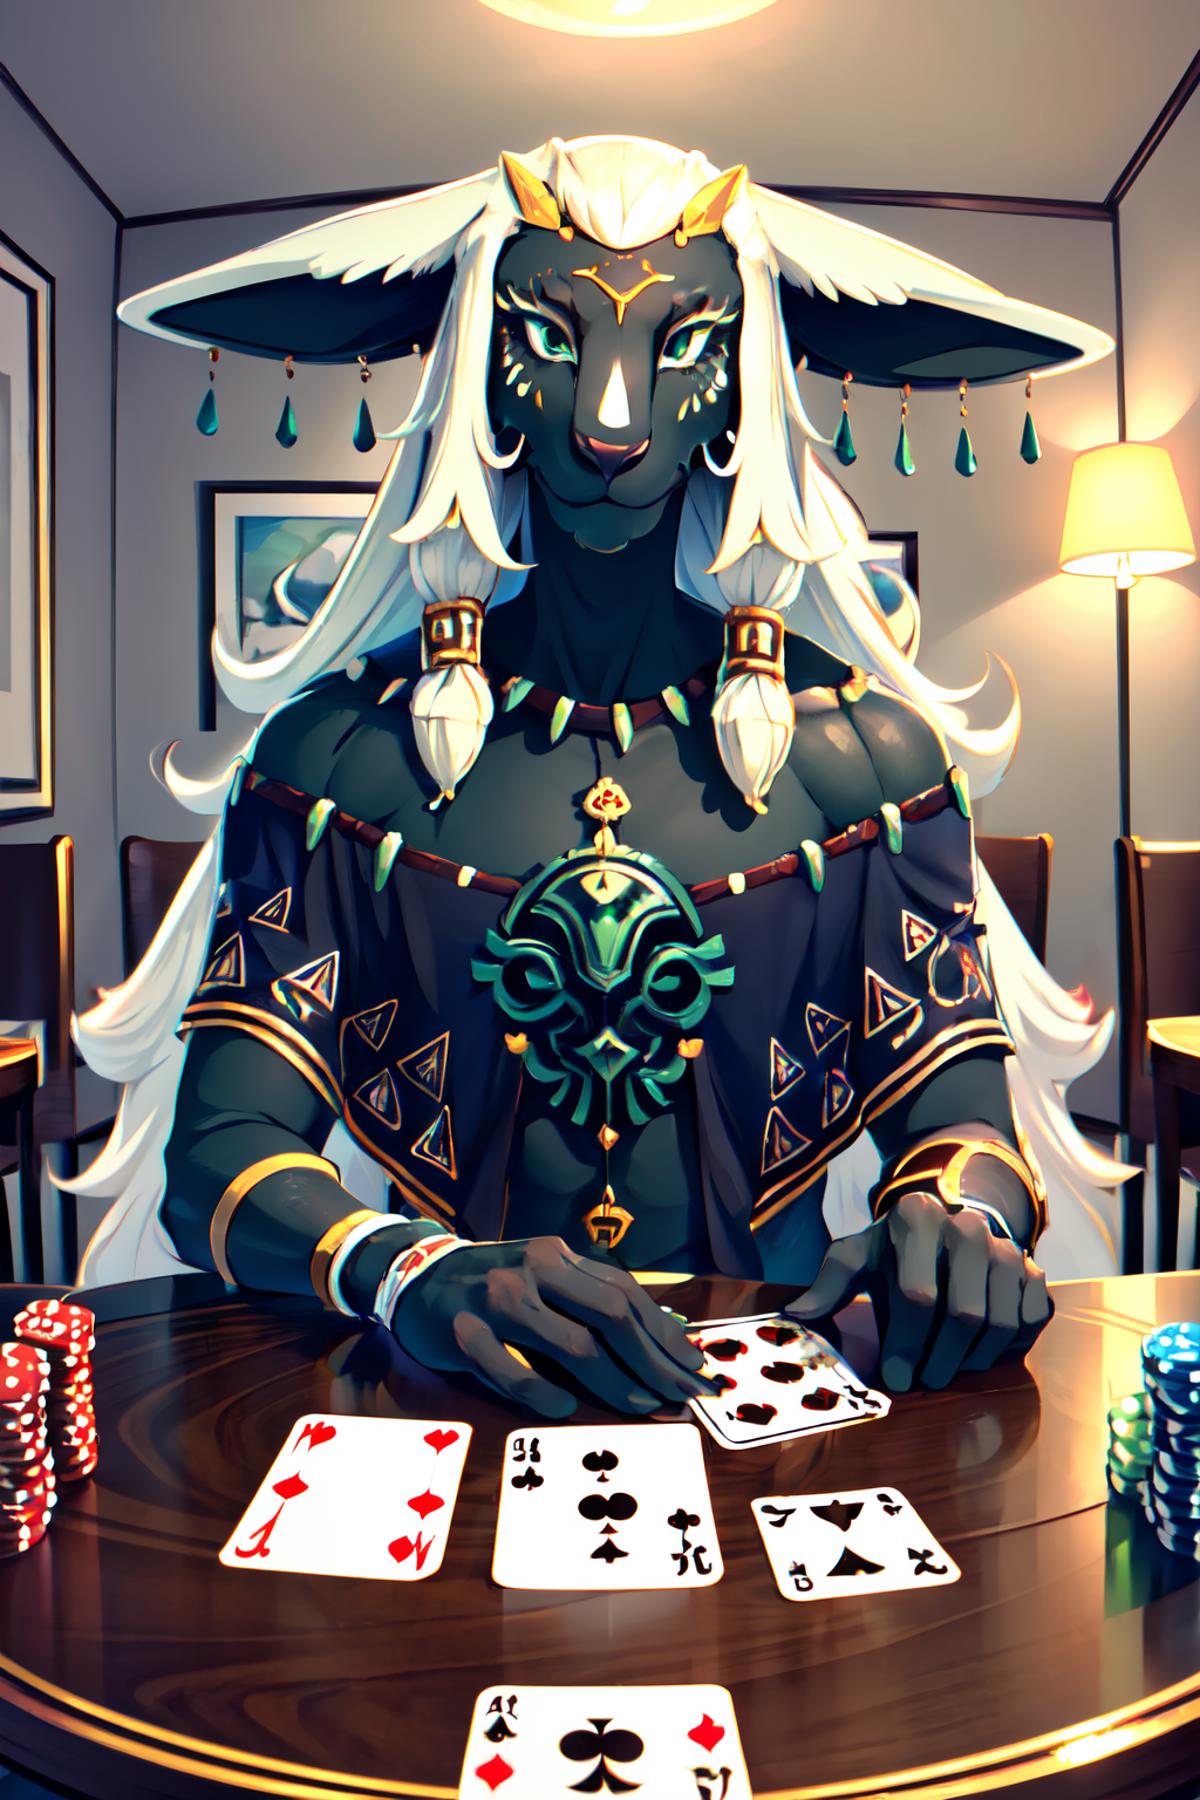 Playing Cards | Concept LoRA image by FallenIncursio